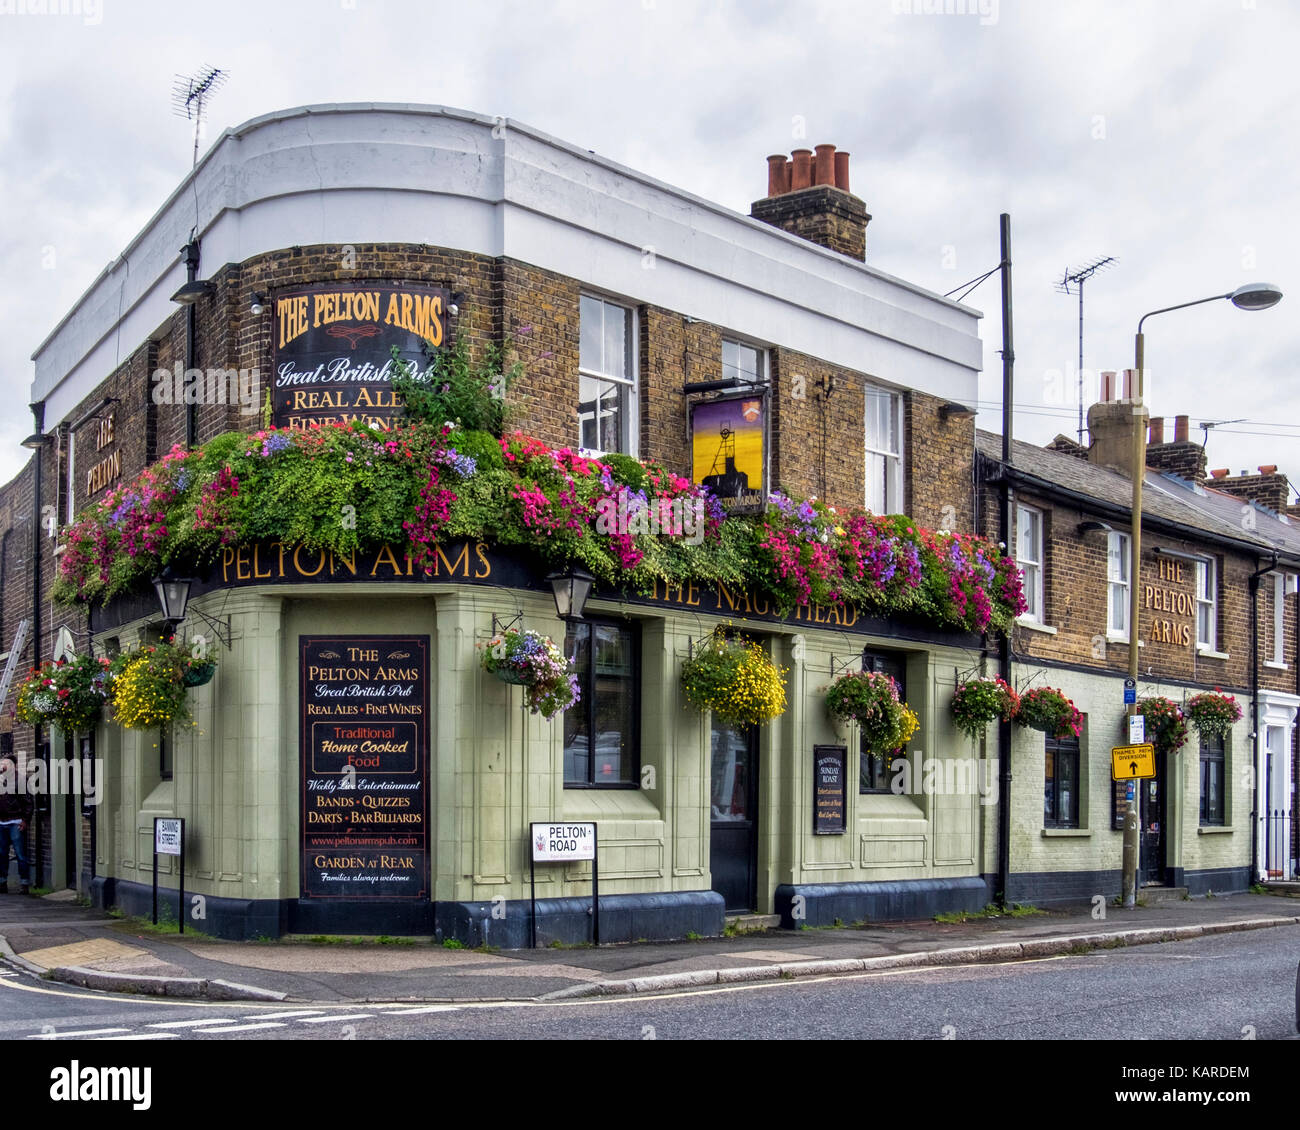 Greenwich, London. The Pelton Arms (previously the Nag's Head), Typical English corner pub with sign and flower baskets.Traditional bar Stock Photo